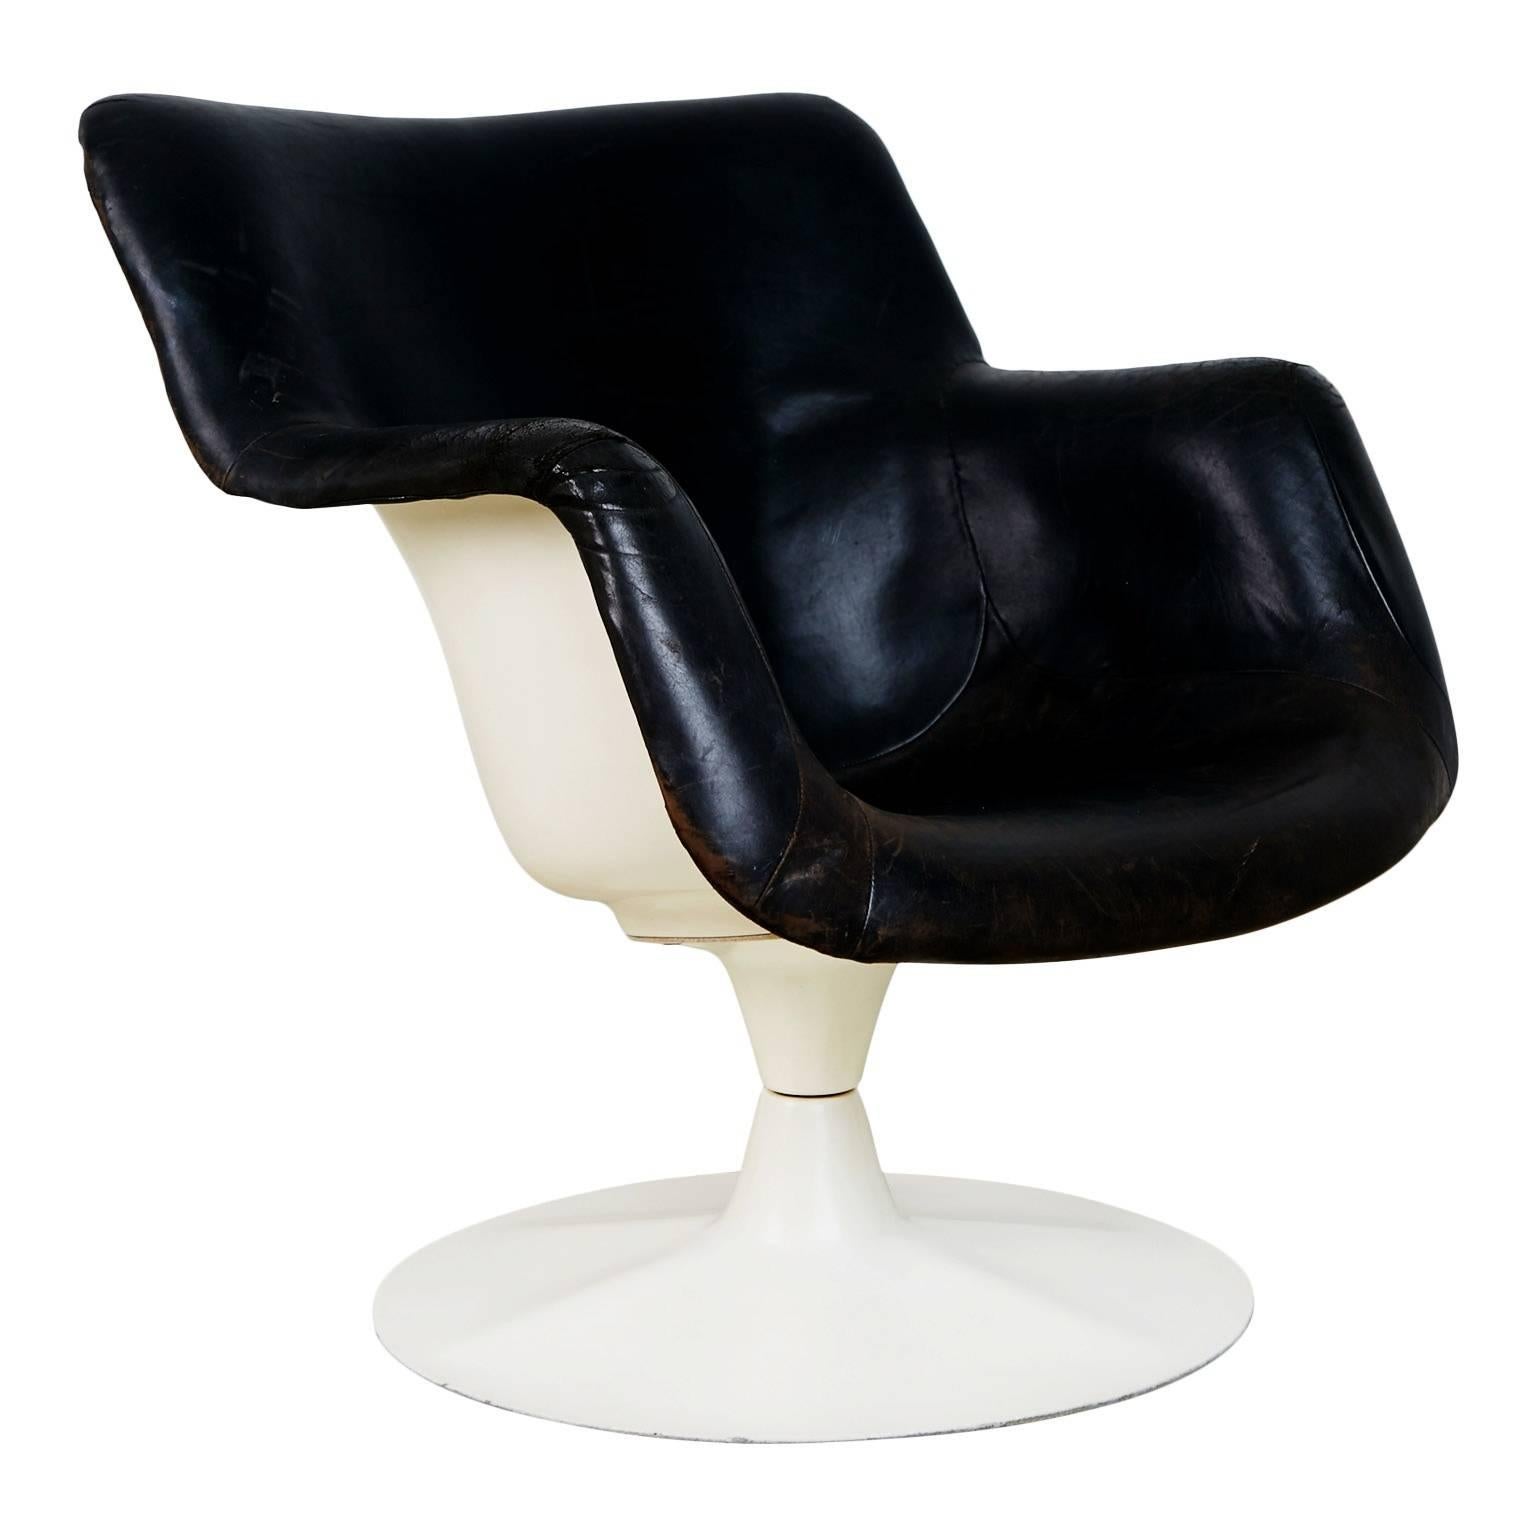 Cool and very collectible swiveling chair by Yrjo¨ Kukkapuro for Haimi, made in Finland, circa 1964. While named "Junior" it is still a full size chair.

This Space Age design features patinated black leather over white fiberglass shell.